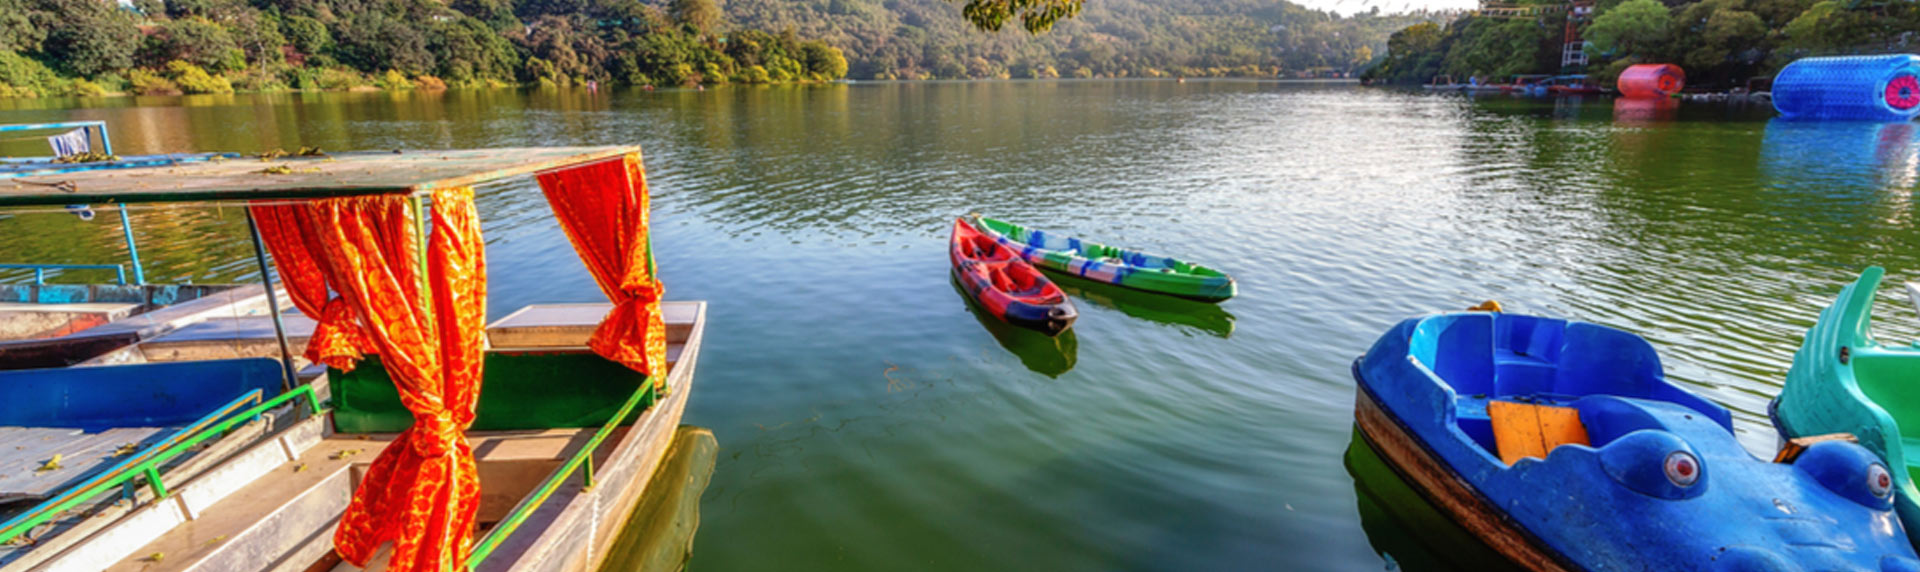 Boating in Naukuchiatal lake Uttarakhand is one of the popular things to do and is famous for sightseeing places